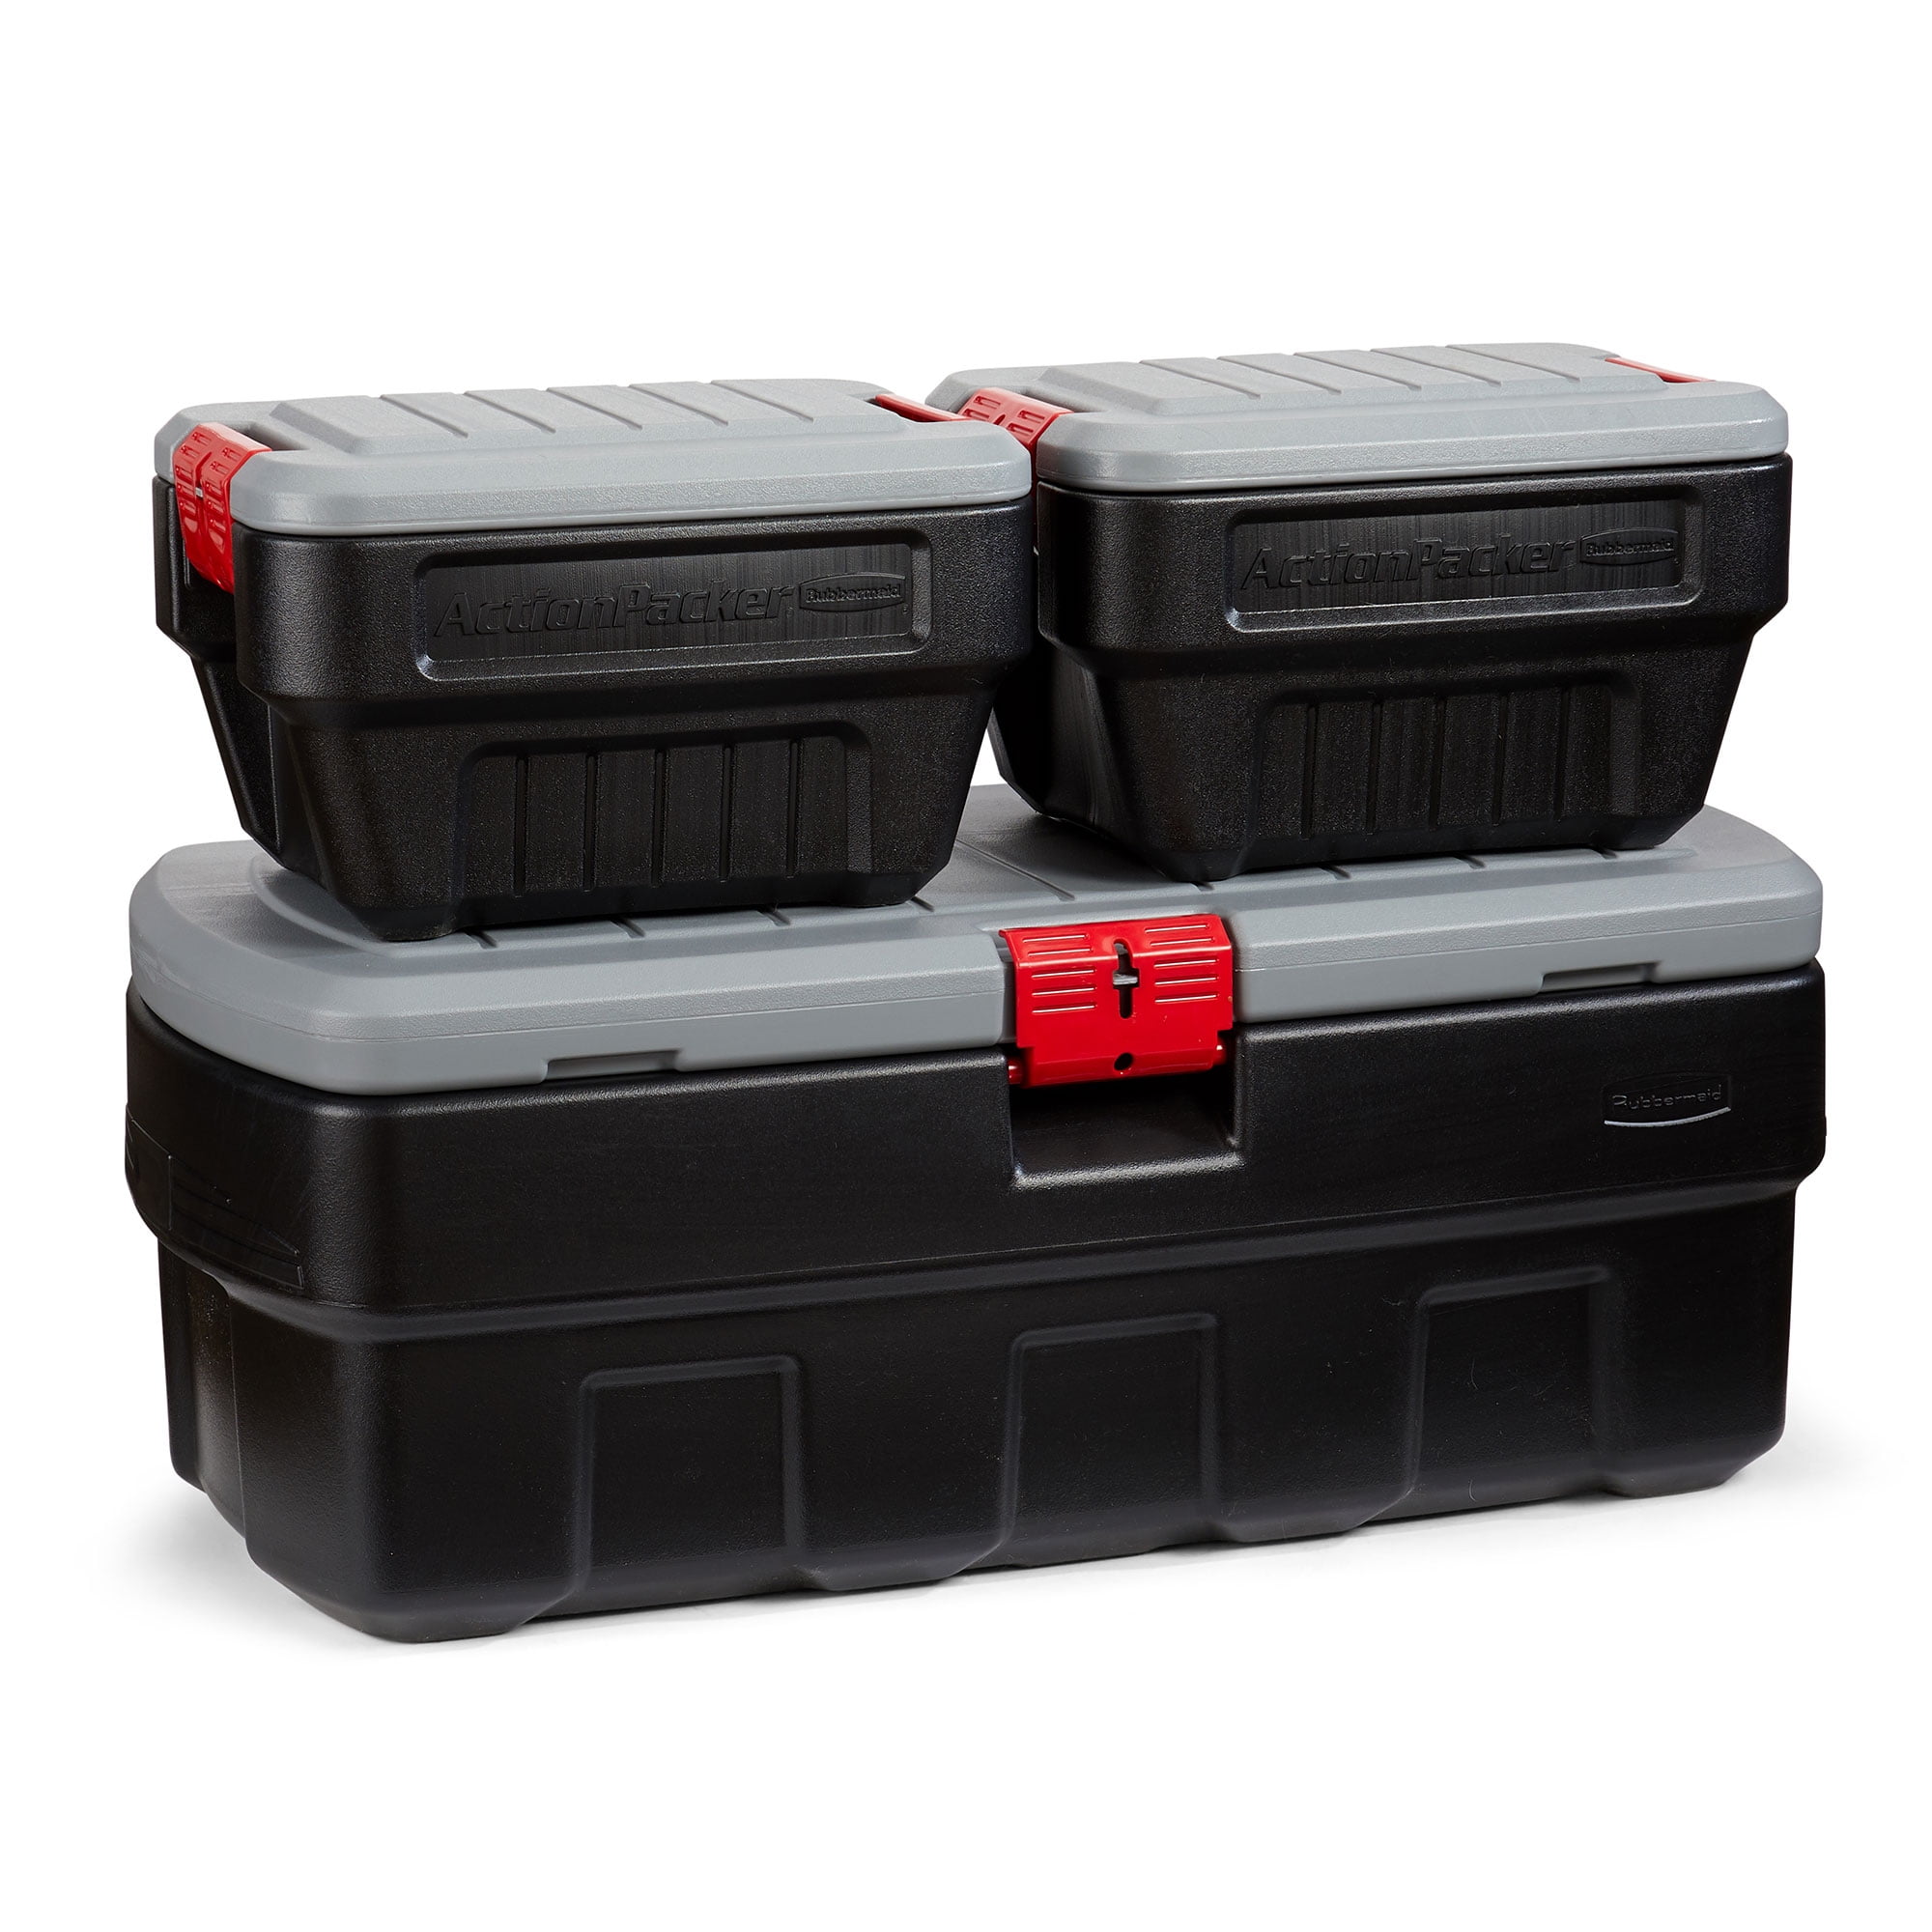 Rubbermaid 35 Gal. Action Packer Lockable Latch Storage Box Tote